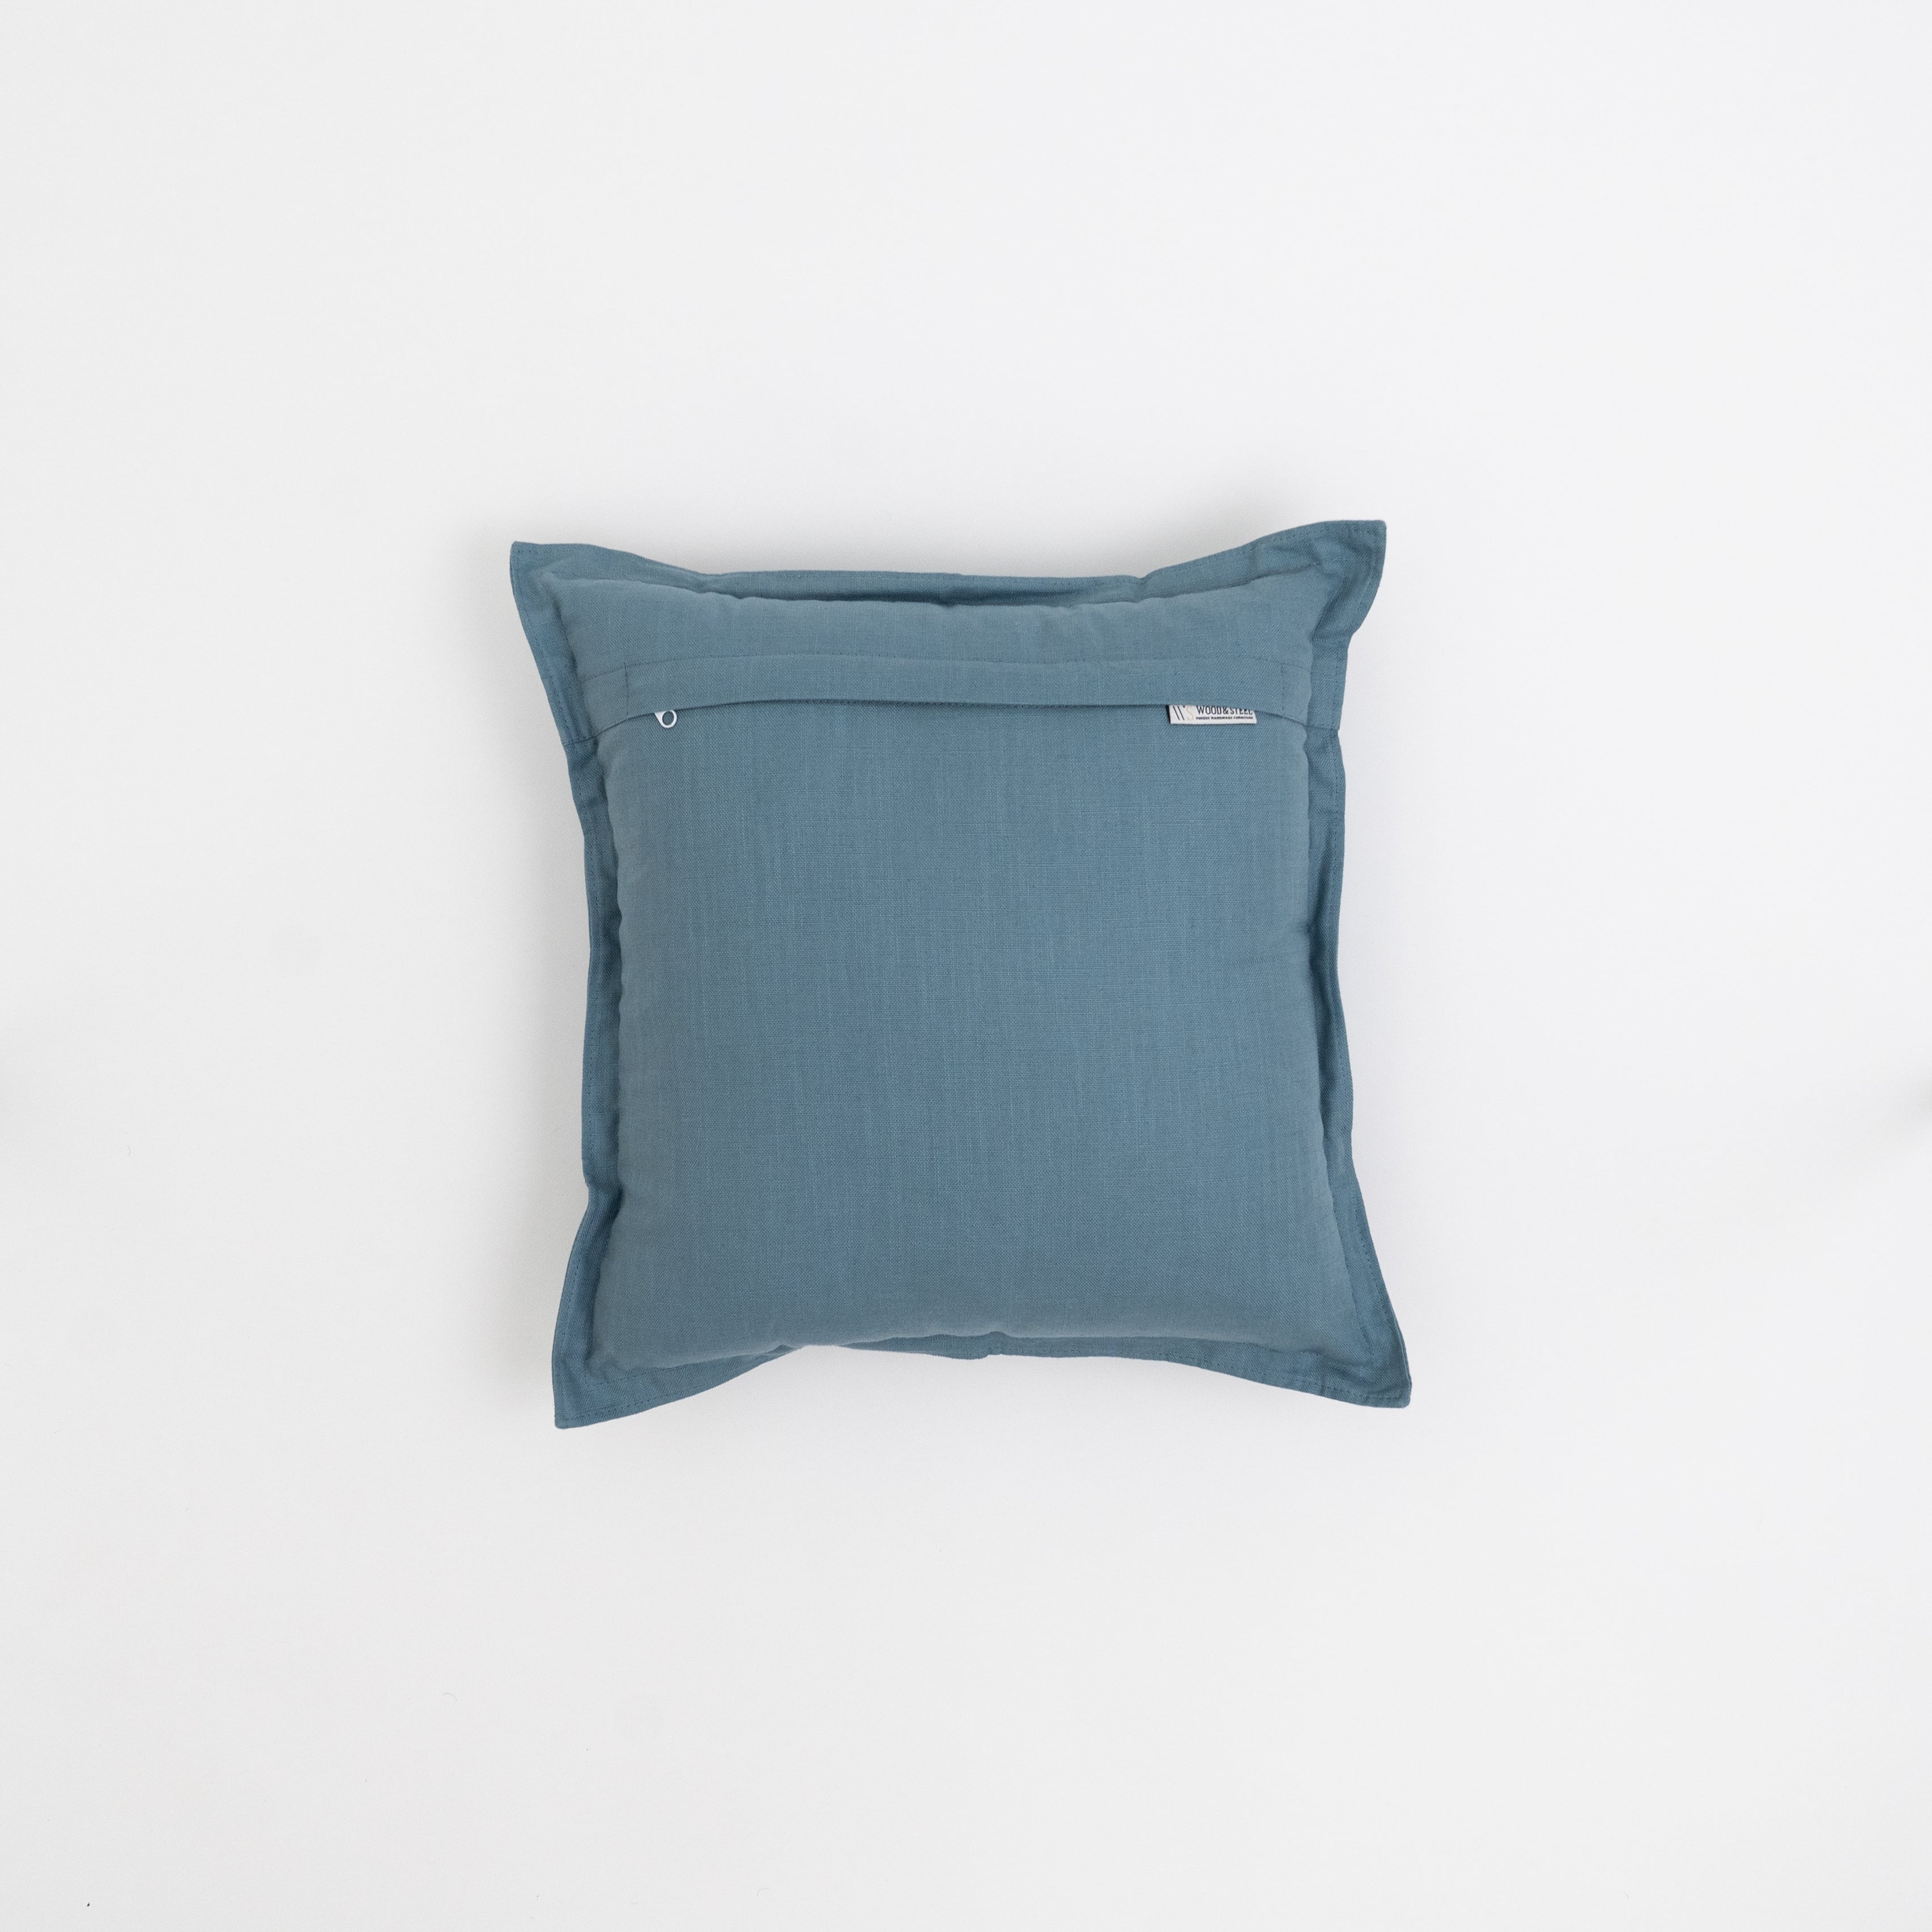 Cushion Cover 45x45cm - Wood and Steel Furnitures